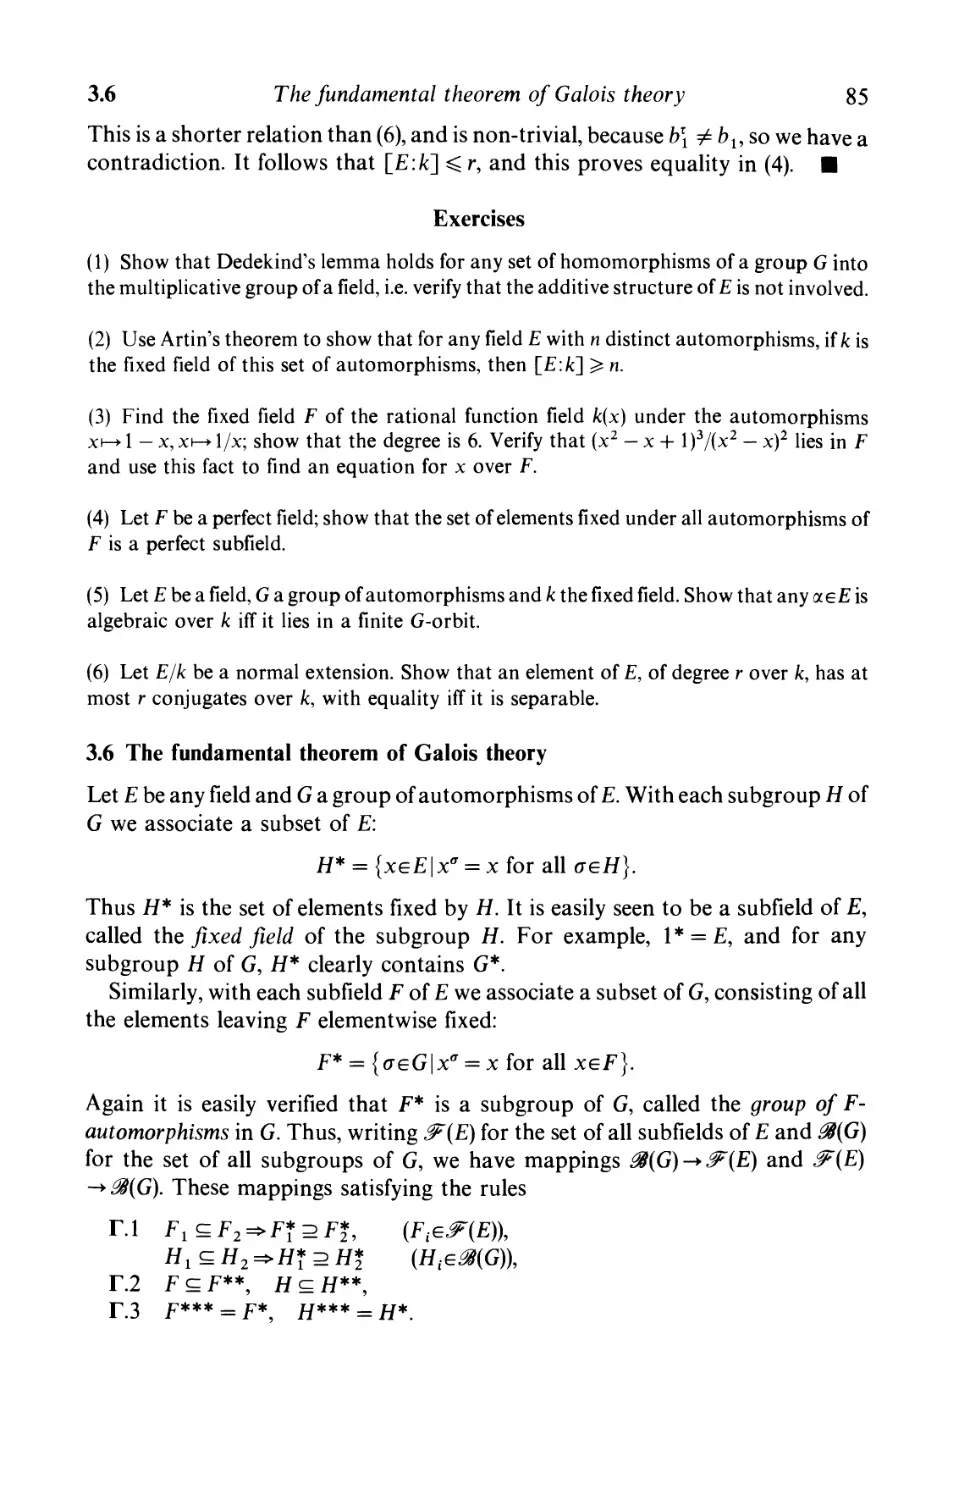 3.6 The fundamental theorem of Galois theory